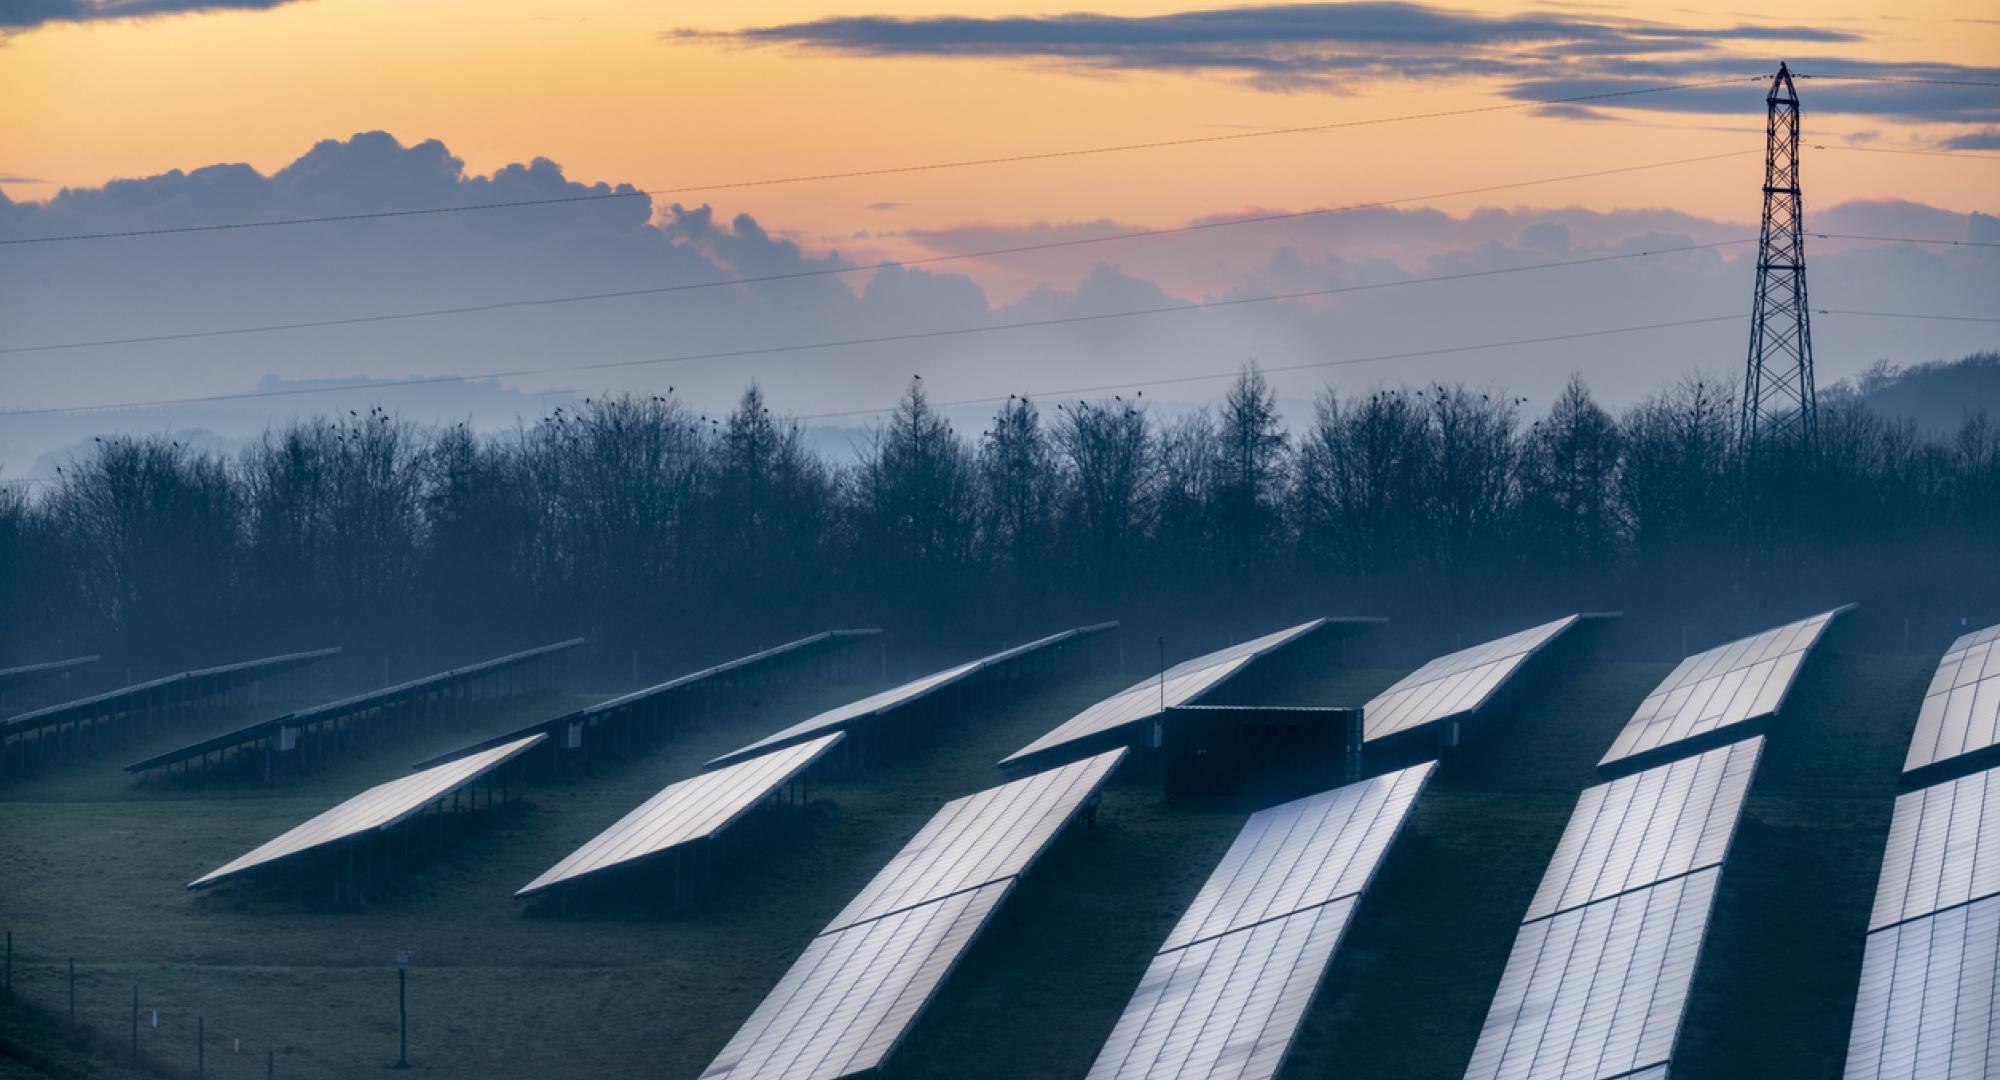 Solar energy park and conventional electricity pylon at sunset, Hampshire, England